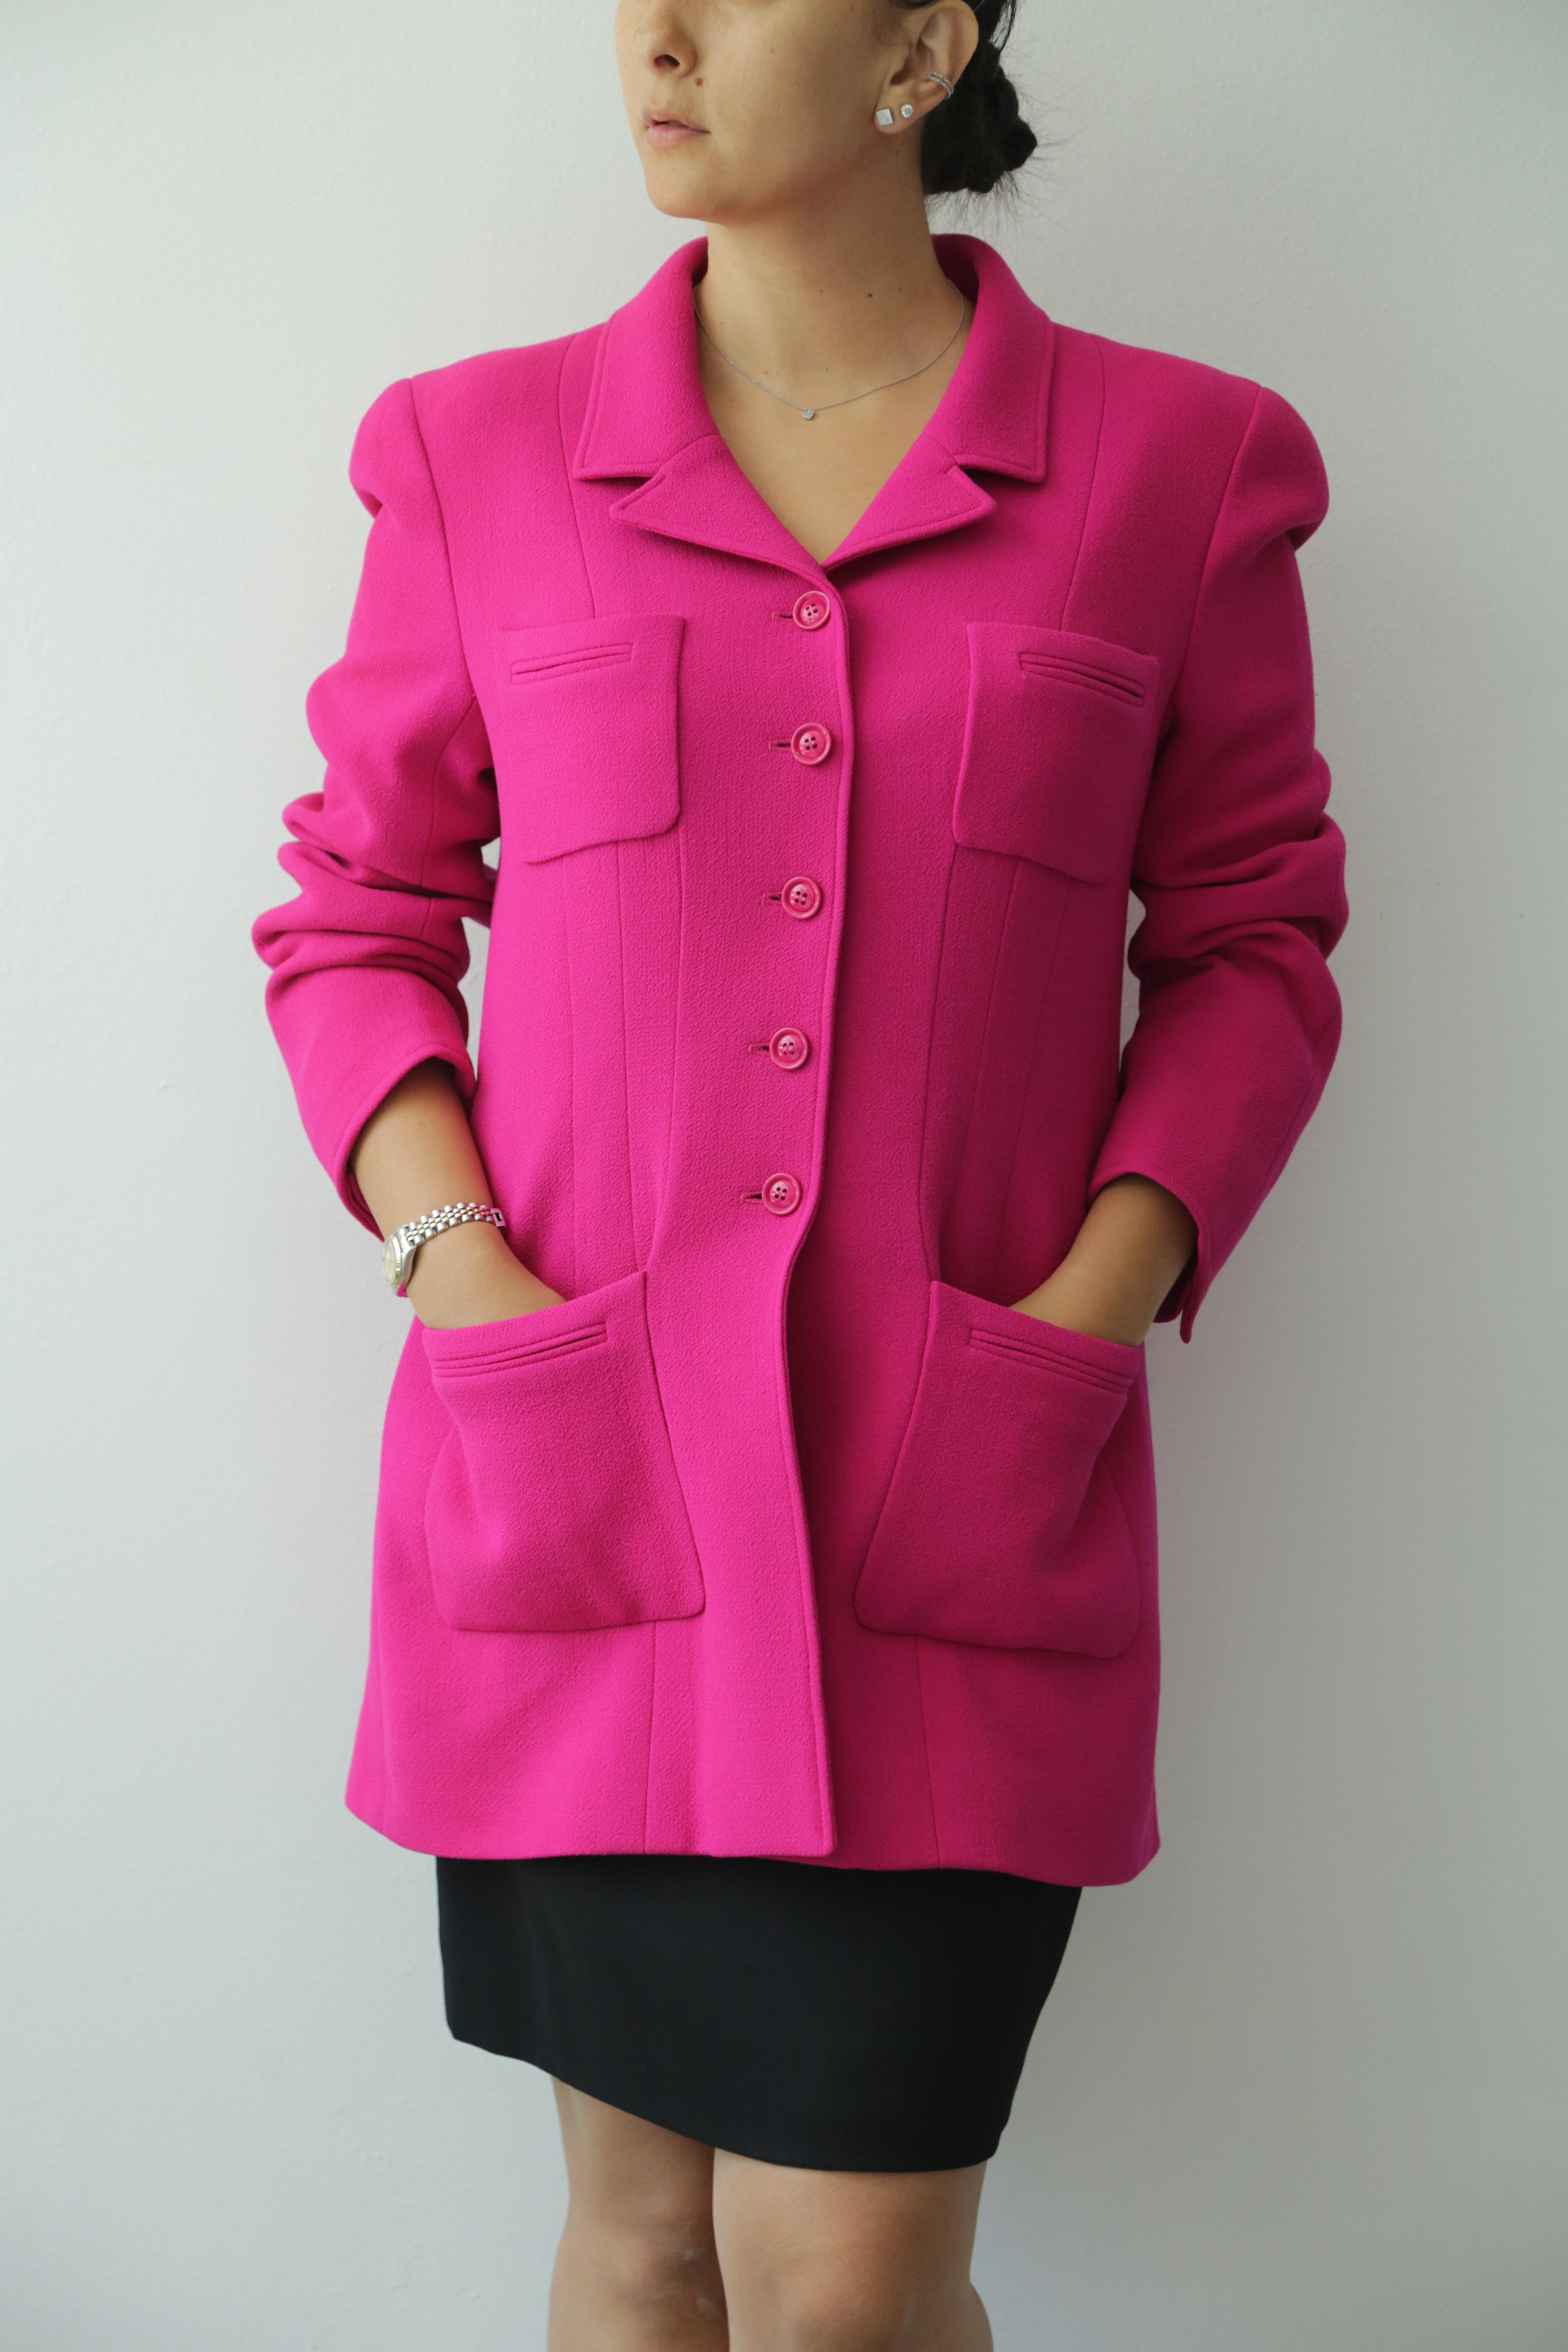 CHANEL Fuchsia Vintage Jacket 
Size 42
From Fall 1985 Collection 
Mid-Thigh in length. Silk lined 
Long Sleeve, fits like a US size 8 
